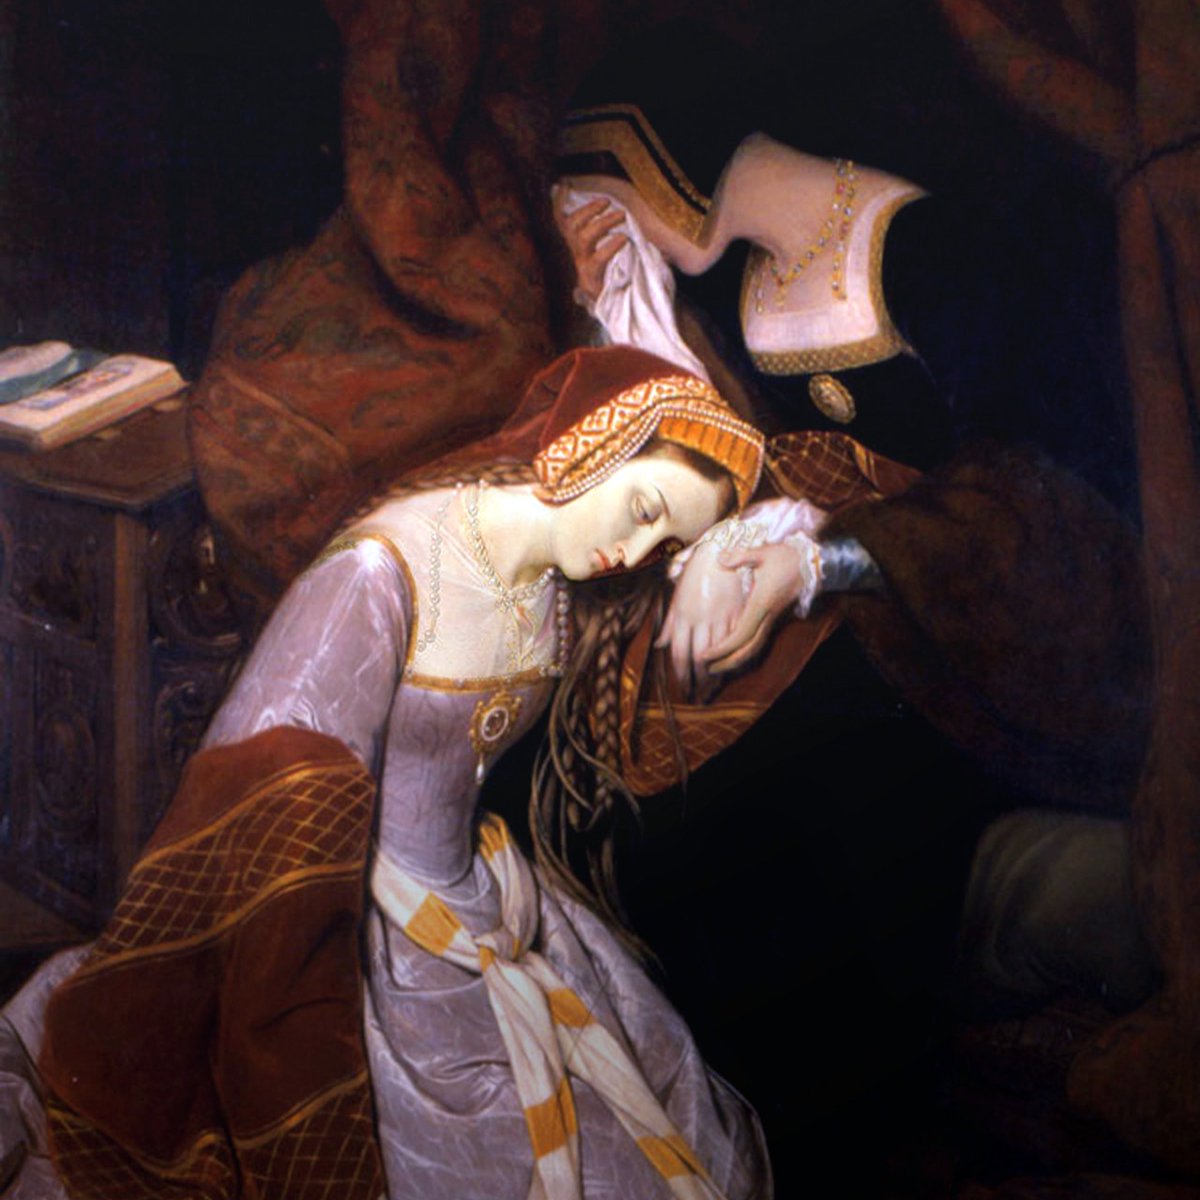 #OnThisDay in 1536, Anne Boleyn was arrested and sent to the Tower of London on charges of adultery, incest and high treason. 2 weeks later, she was found guilty of her supposed crimes and sentenced to death.